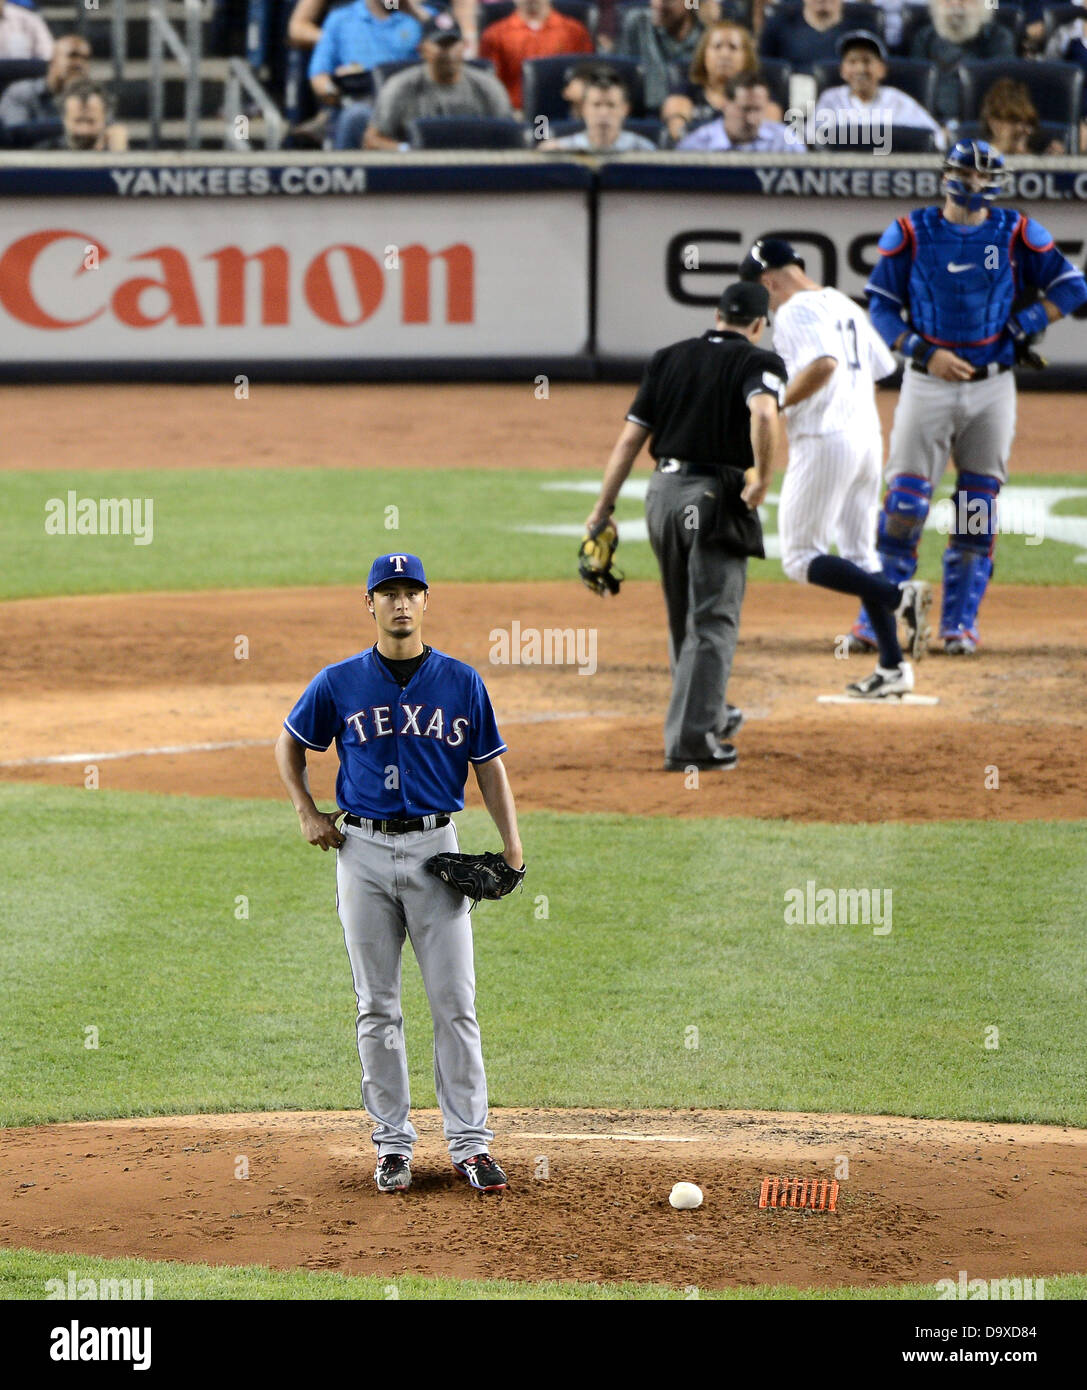 Yu Darvish (Rangers), JUNE 25, 2013 - MLB : Yu Darvish of the Texas Rangers reacts after giving up a home run to Brett Gardner of the New York Yankees, crossing home plate, in the fifth inning during the Major League Baseball game at Yankee Stadium in The Bronx, New York, United States. (Photo by AFLO) Stock Photo